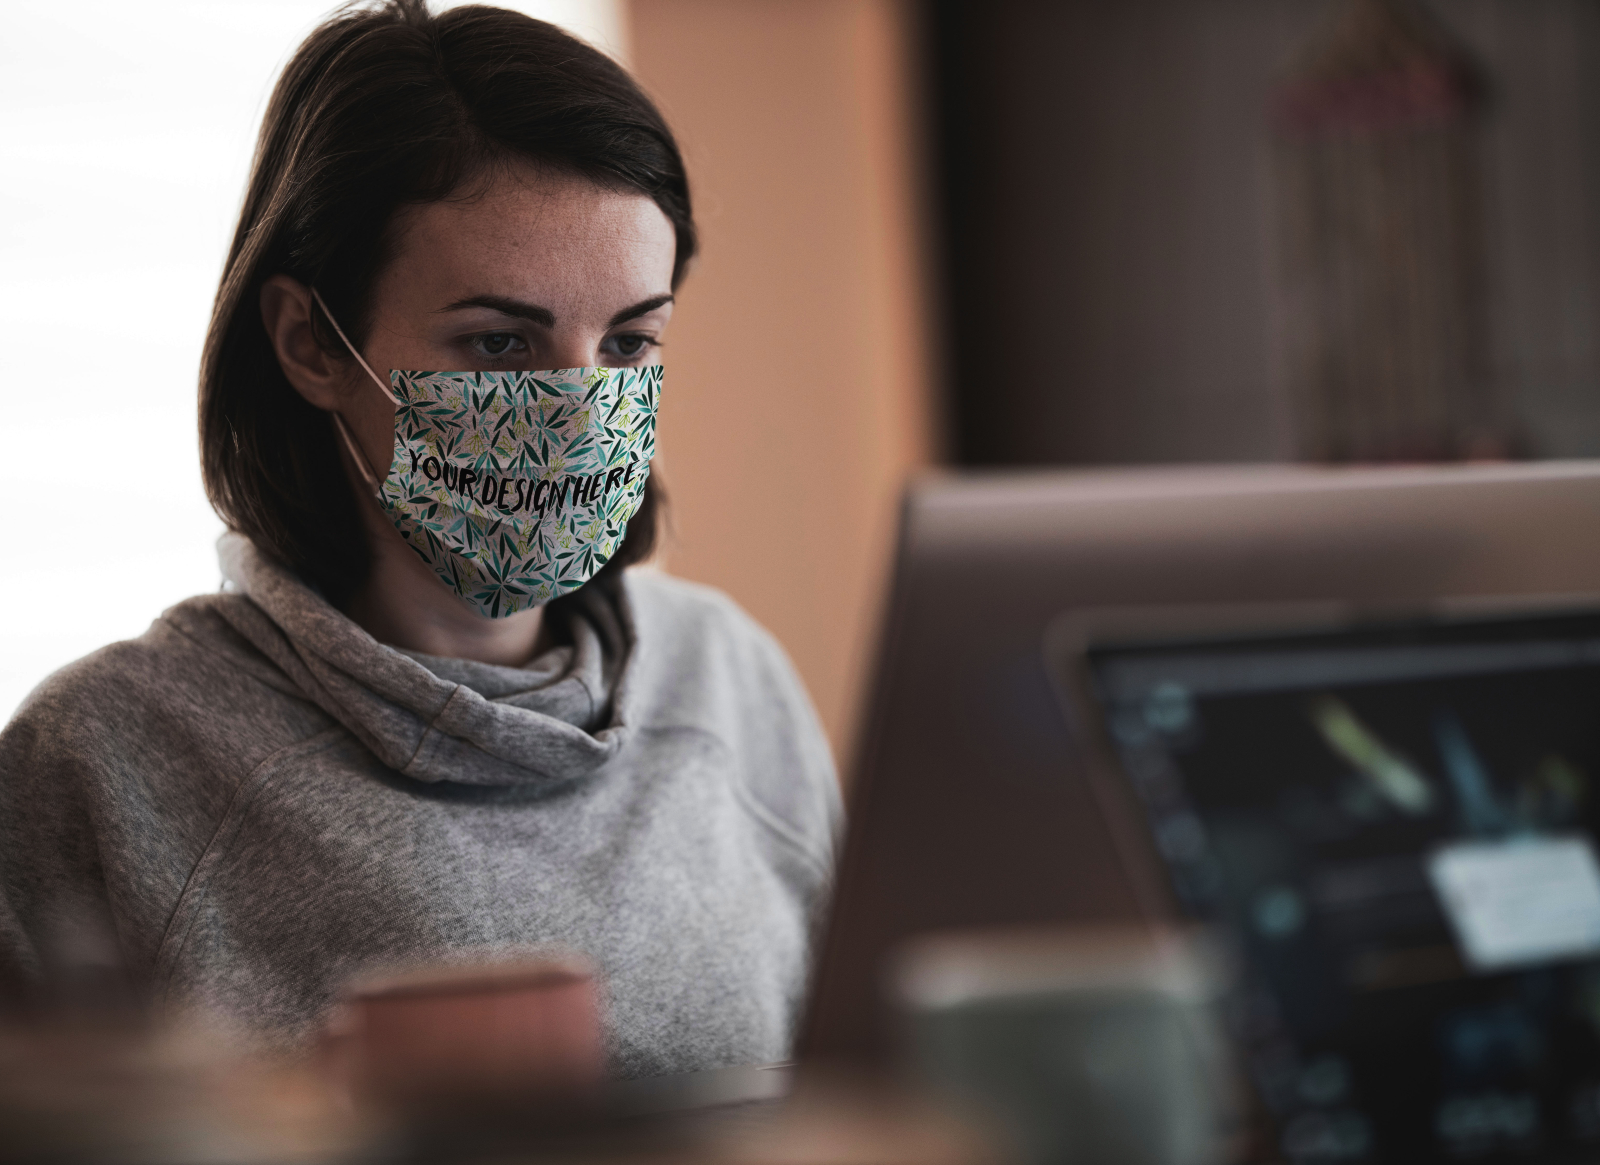 Download Working in Face Mask Mockup Free PSD by Roman Kups on Dribbble